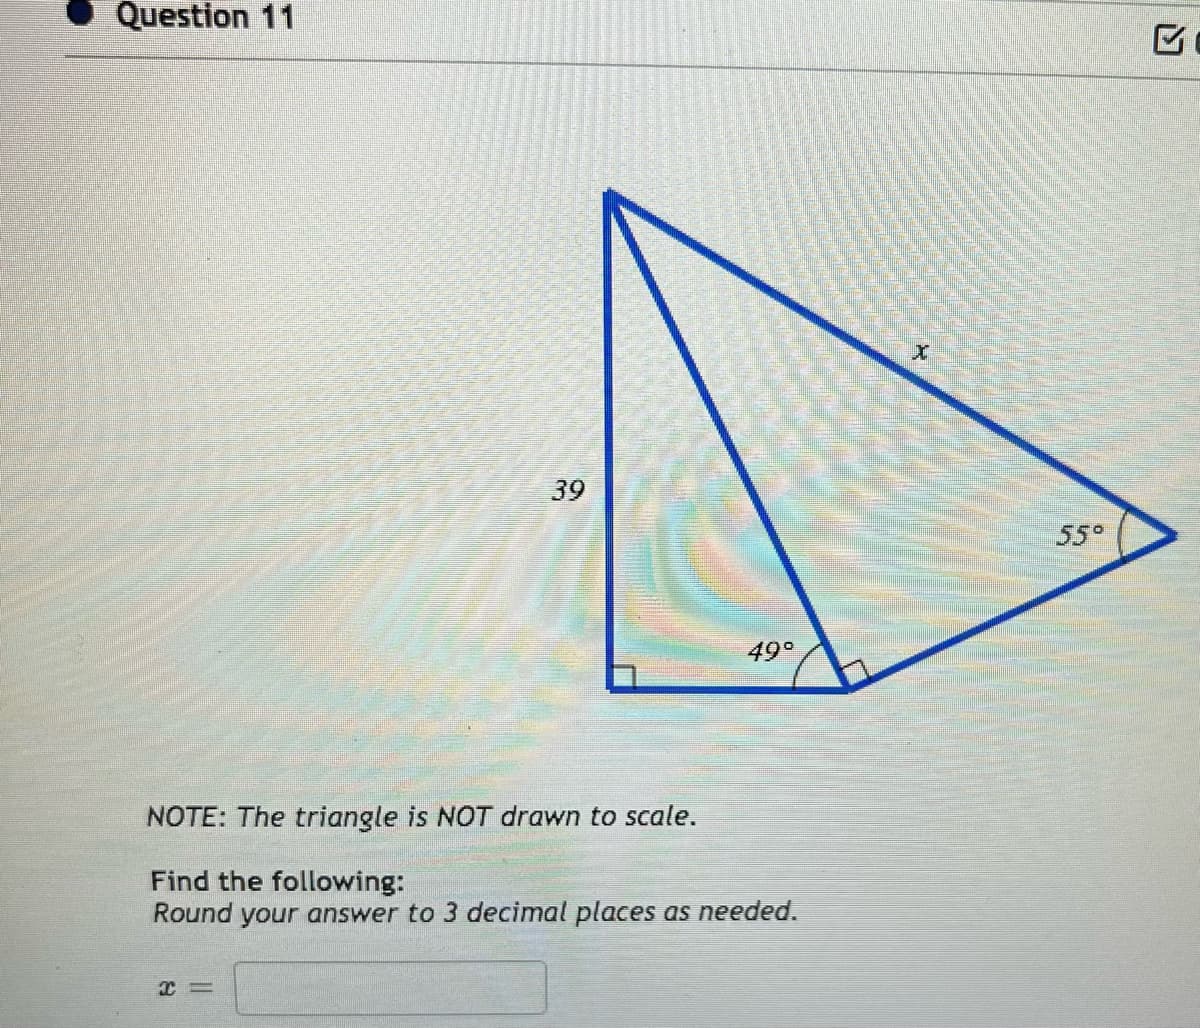 Question 11
39
X=
49°
NOTE: The triangle is NOT drawn to scale.
Find the following:
Round your answer to 3 decimal places as needed.
X
55°